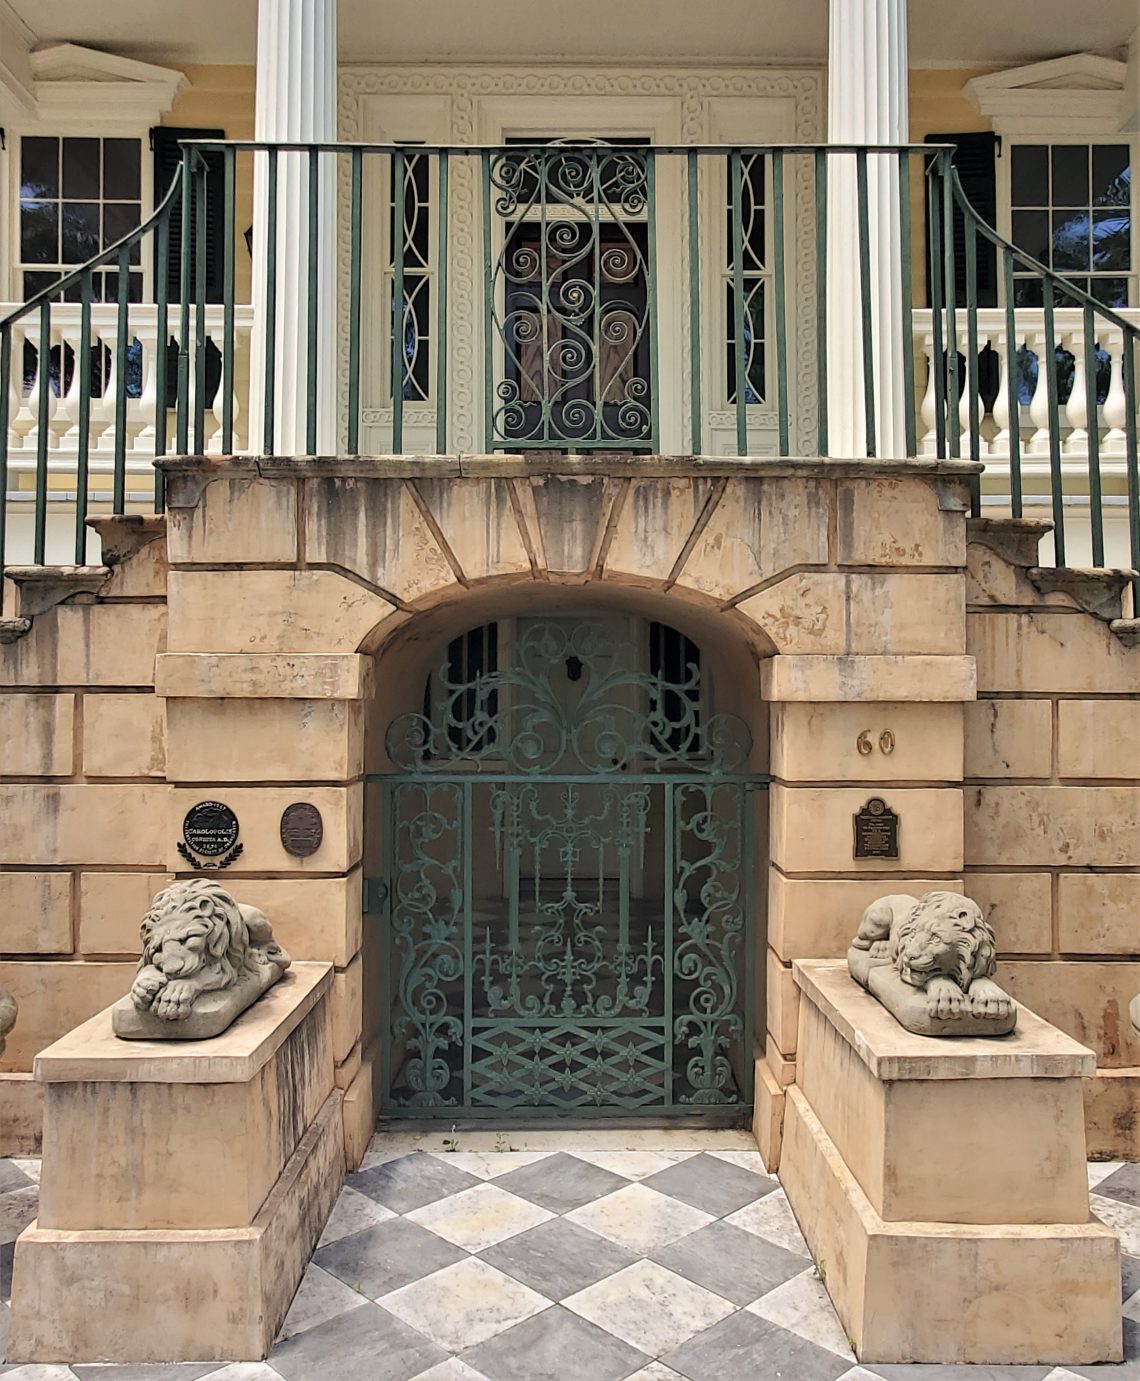 These semi-aware lions guard the beautiful entrance of the Gaillard-Bennett House on Montagu Street. Robert E. Lee stayed there on his post war visit to Charleston.